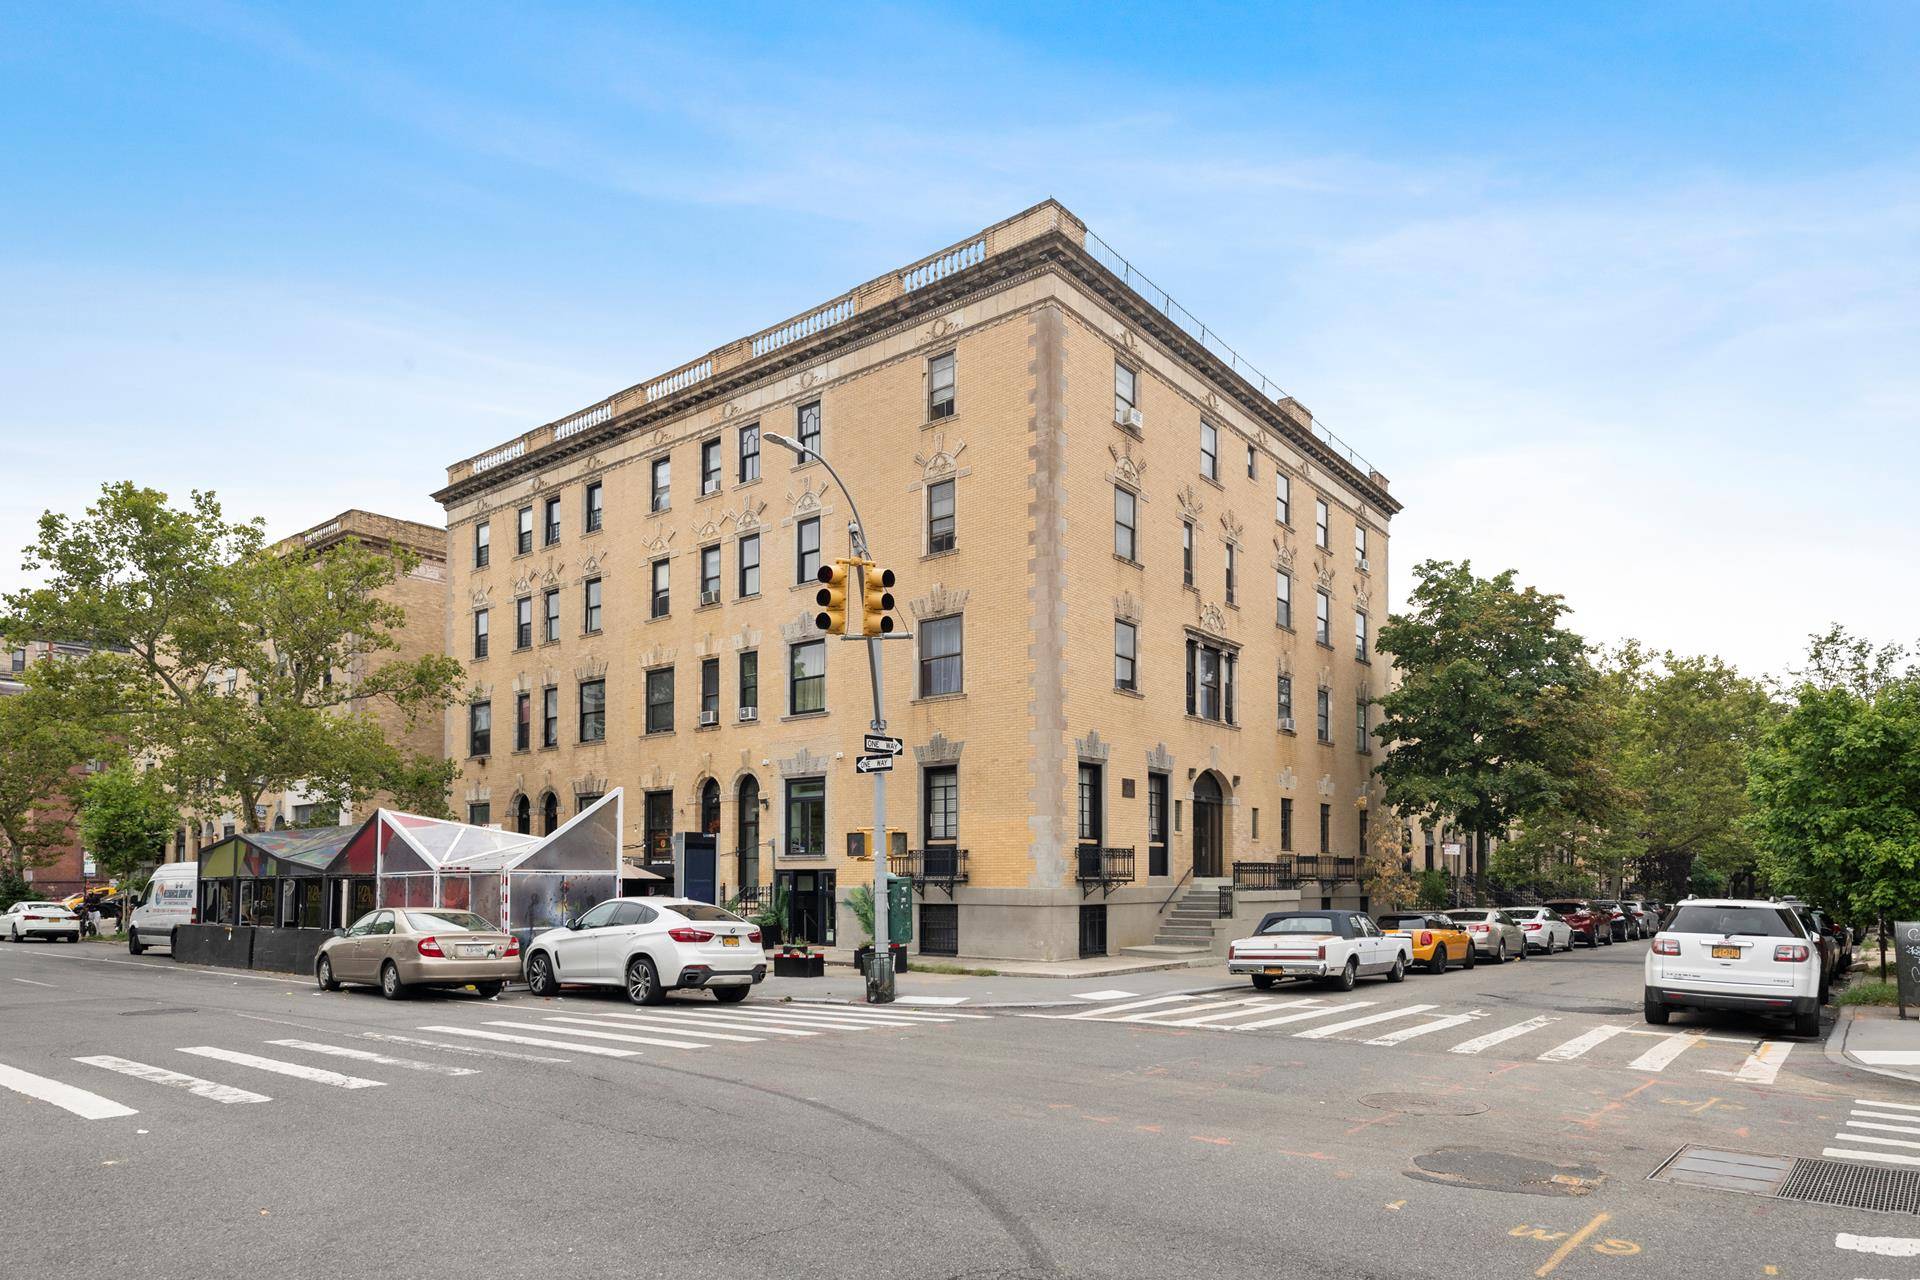 Douglas Elliman Real Estate is pleased to present 200 W 139th St, a five story, 7, 066 square foot, walk up building, in historic Striver's Row neighborhood of Harlem.